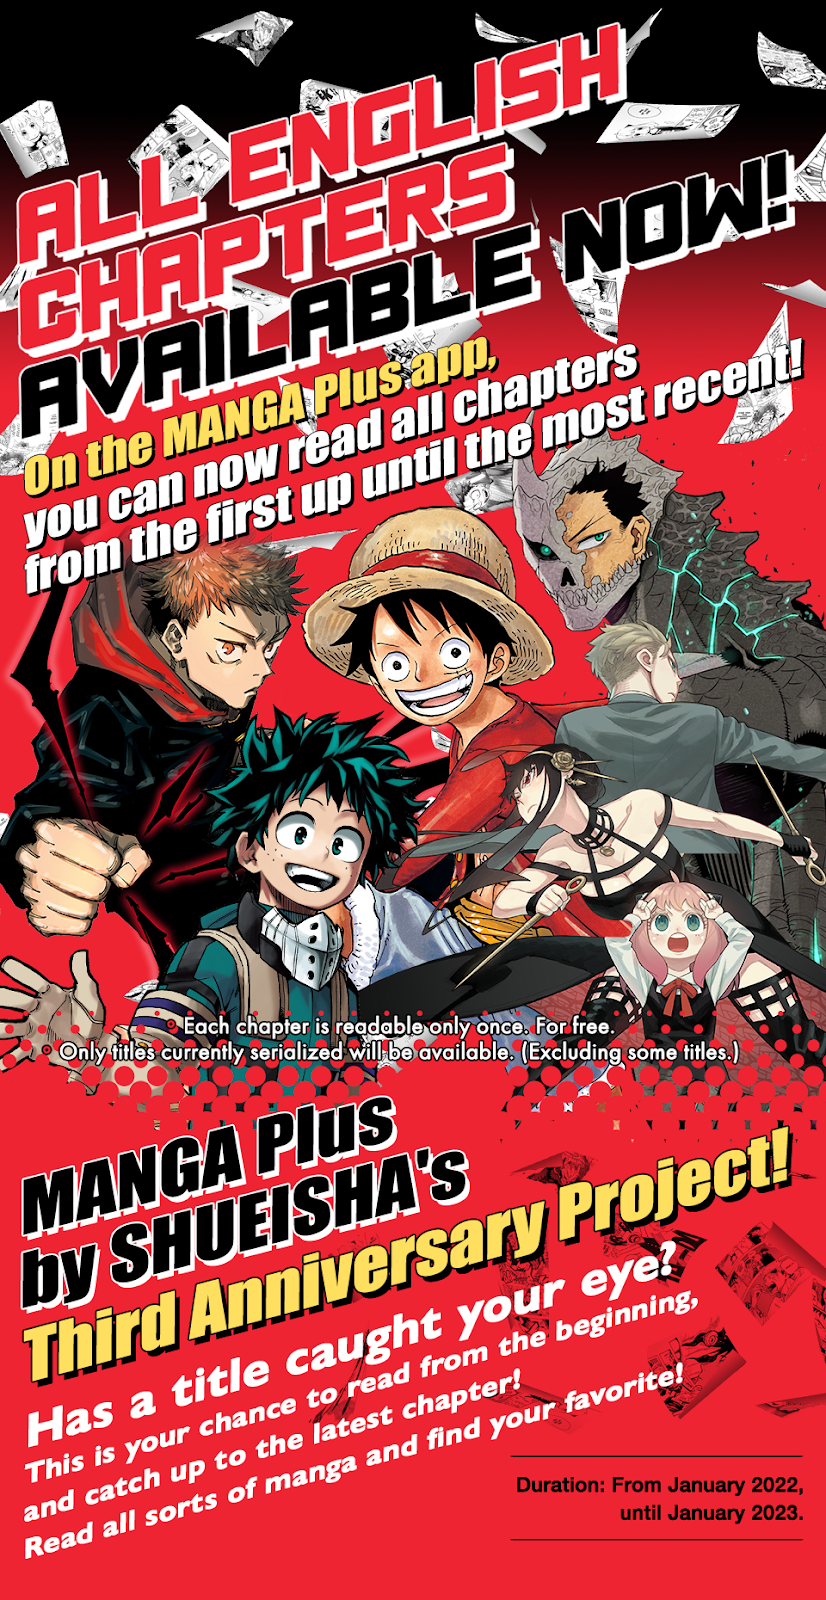 Is it really worth reading the manga? How could it possibly get